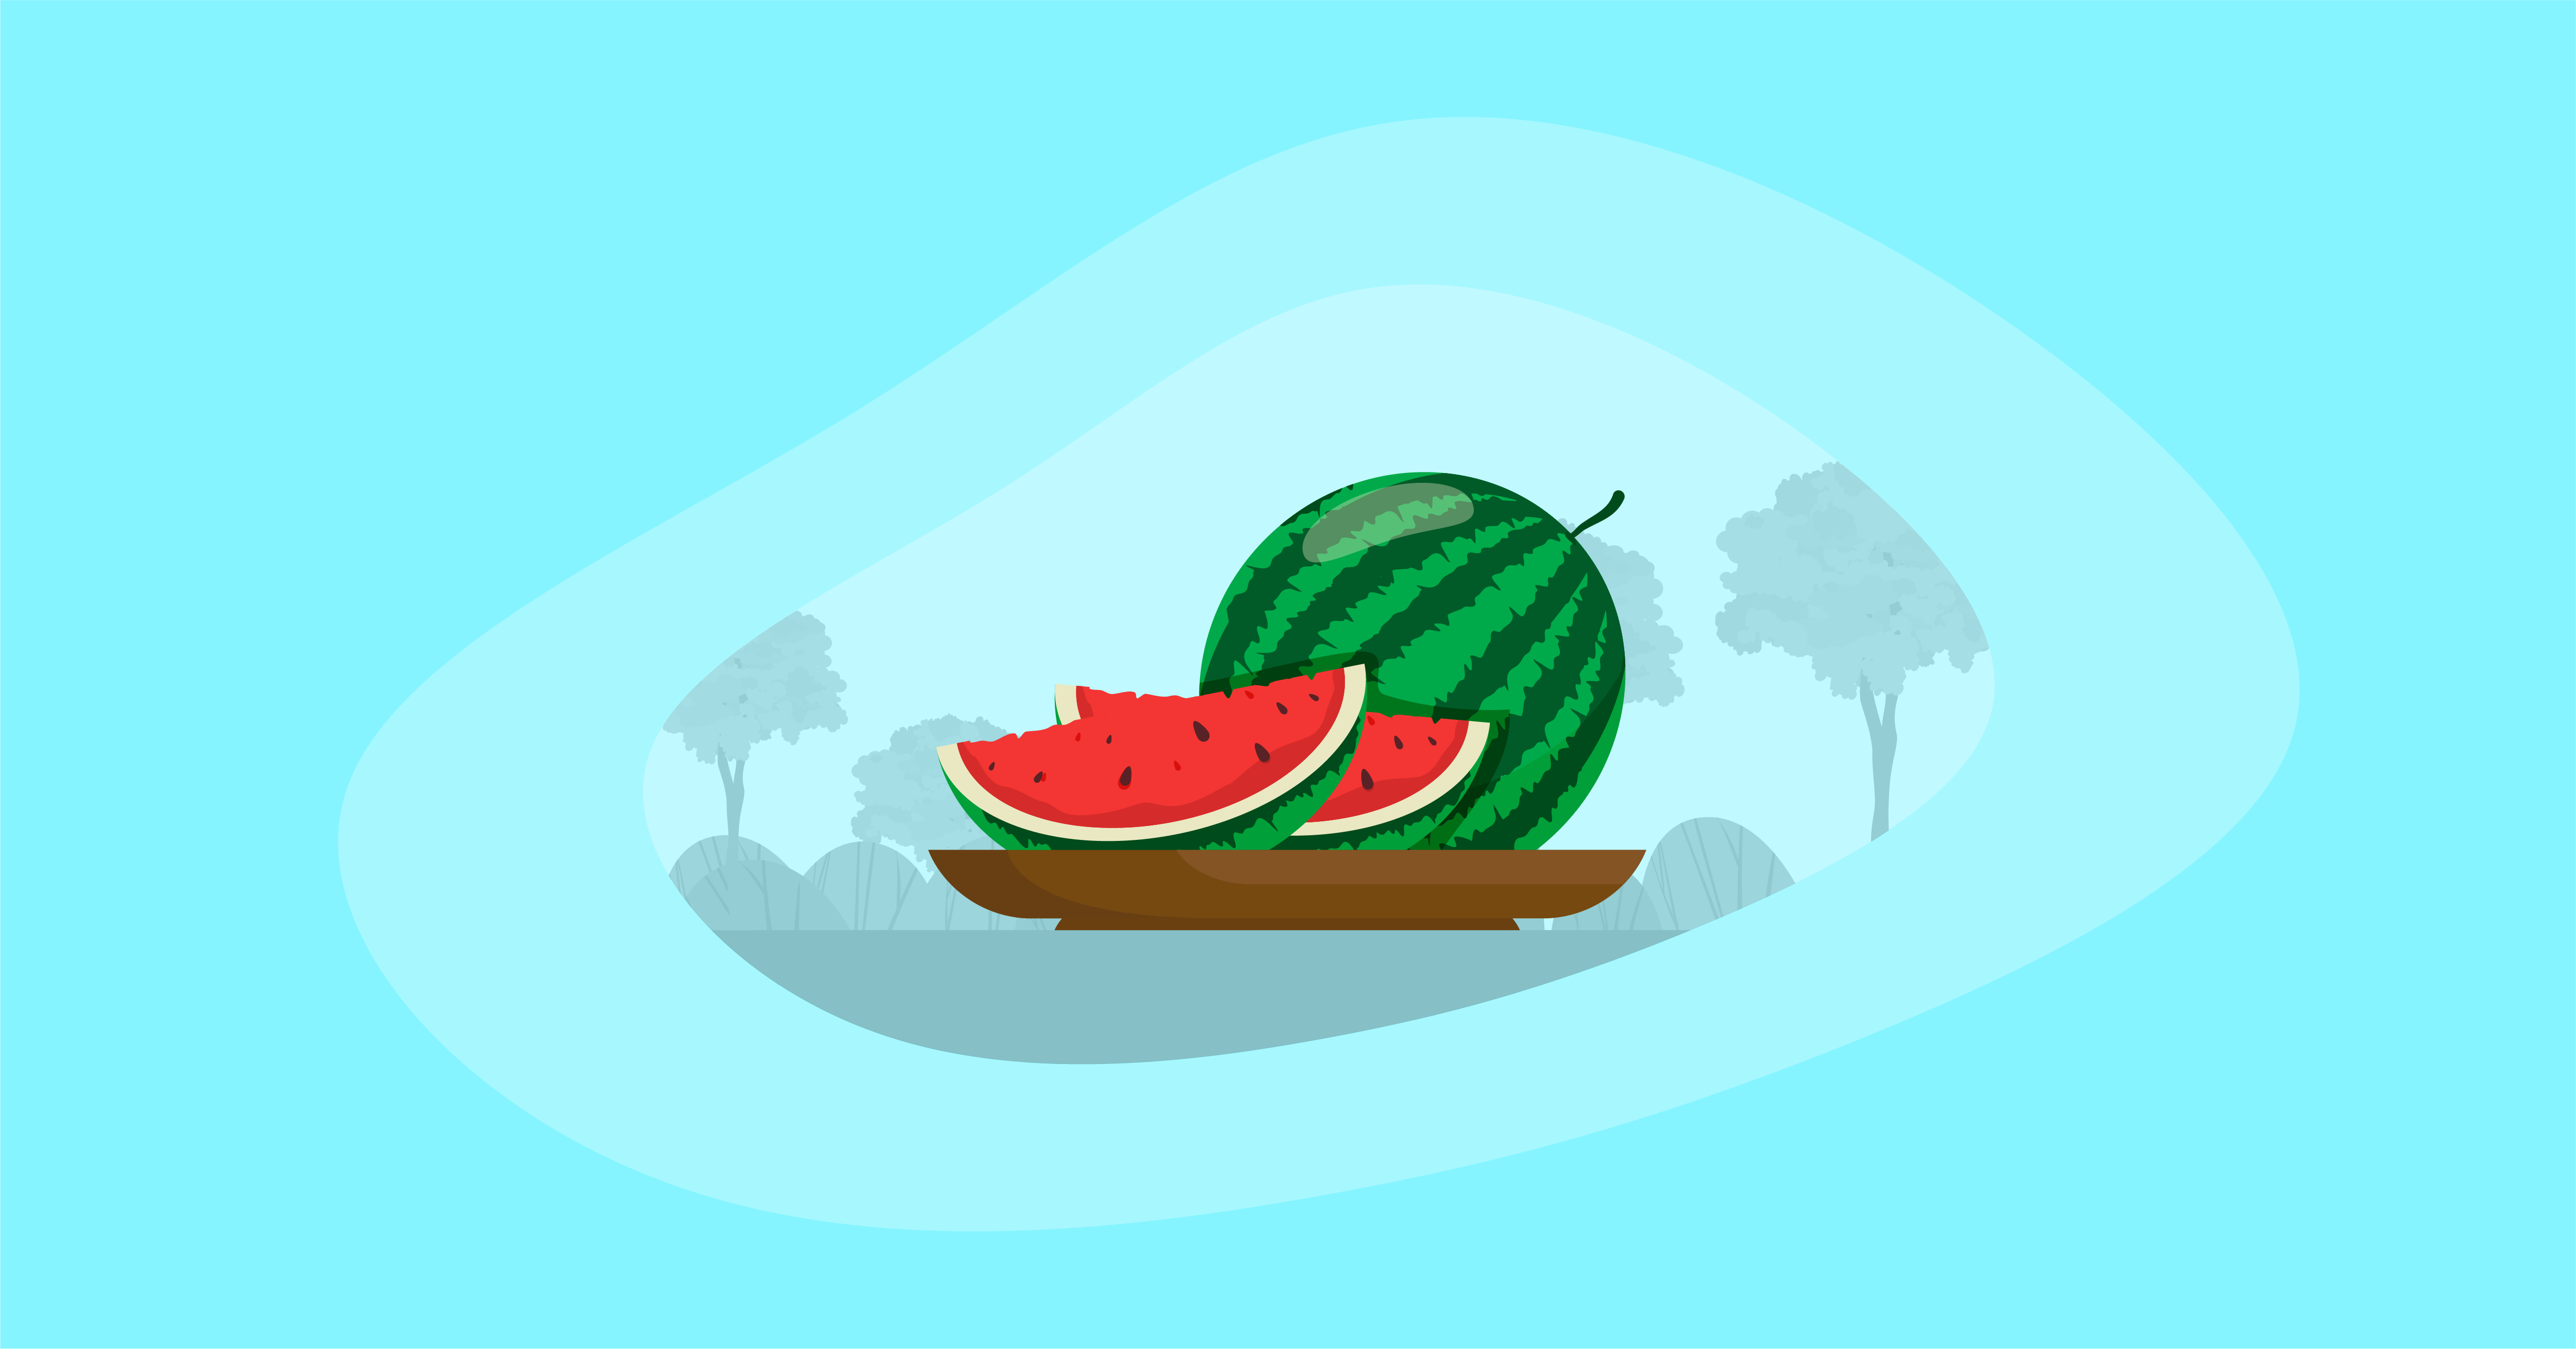 Illustration of watermelons in a wooden platter